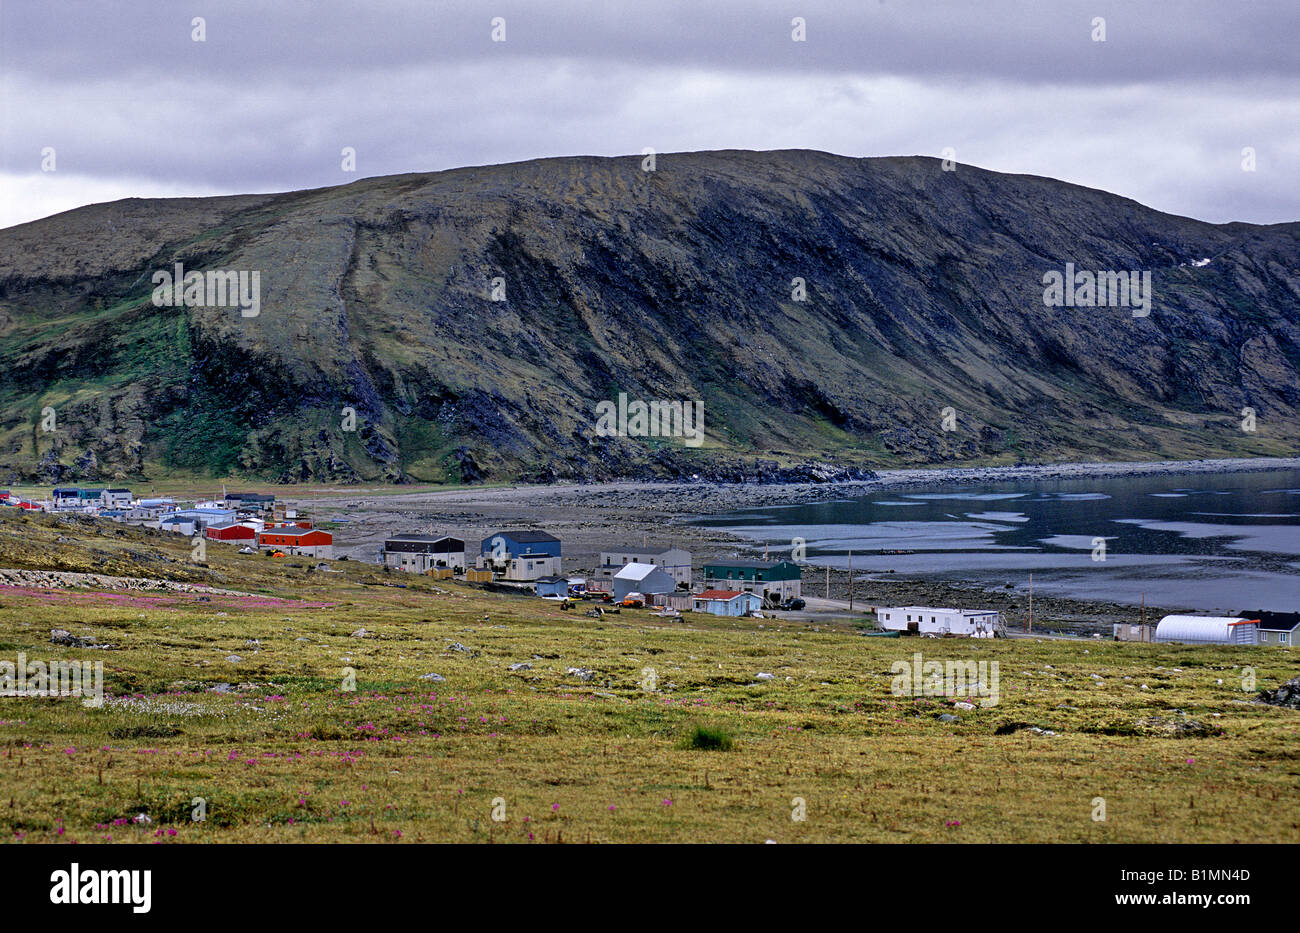 The city of Kangiqsujuaq in the Hudson Bay in Canada Stock Photo